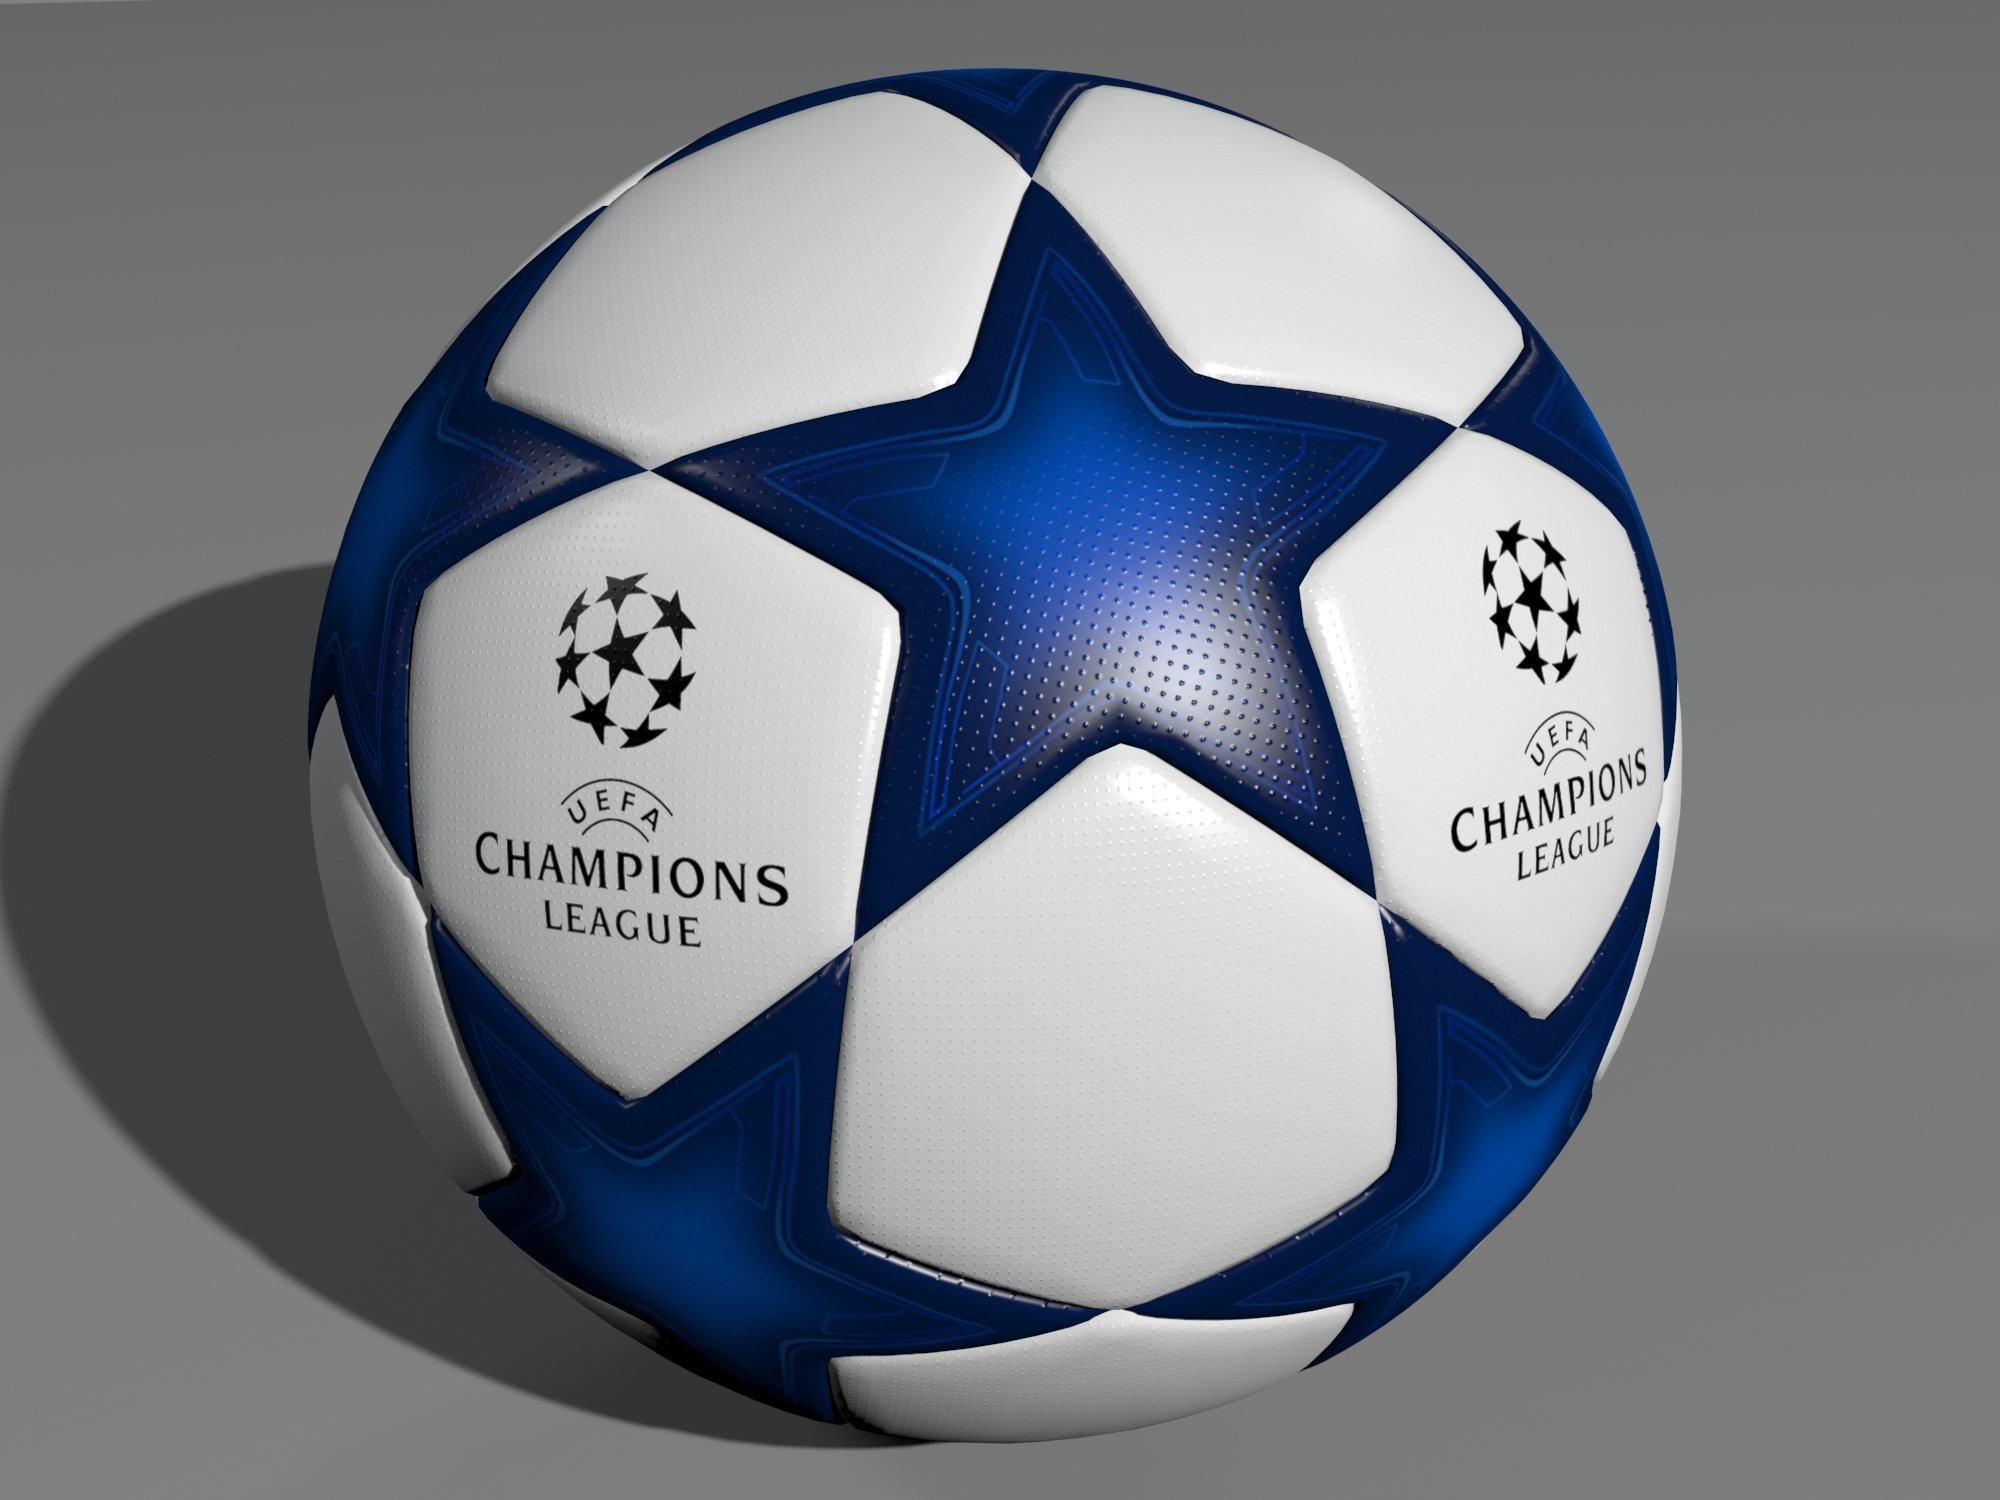 the new champions league ball